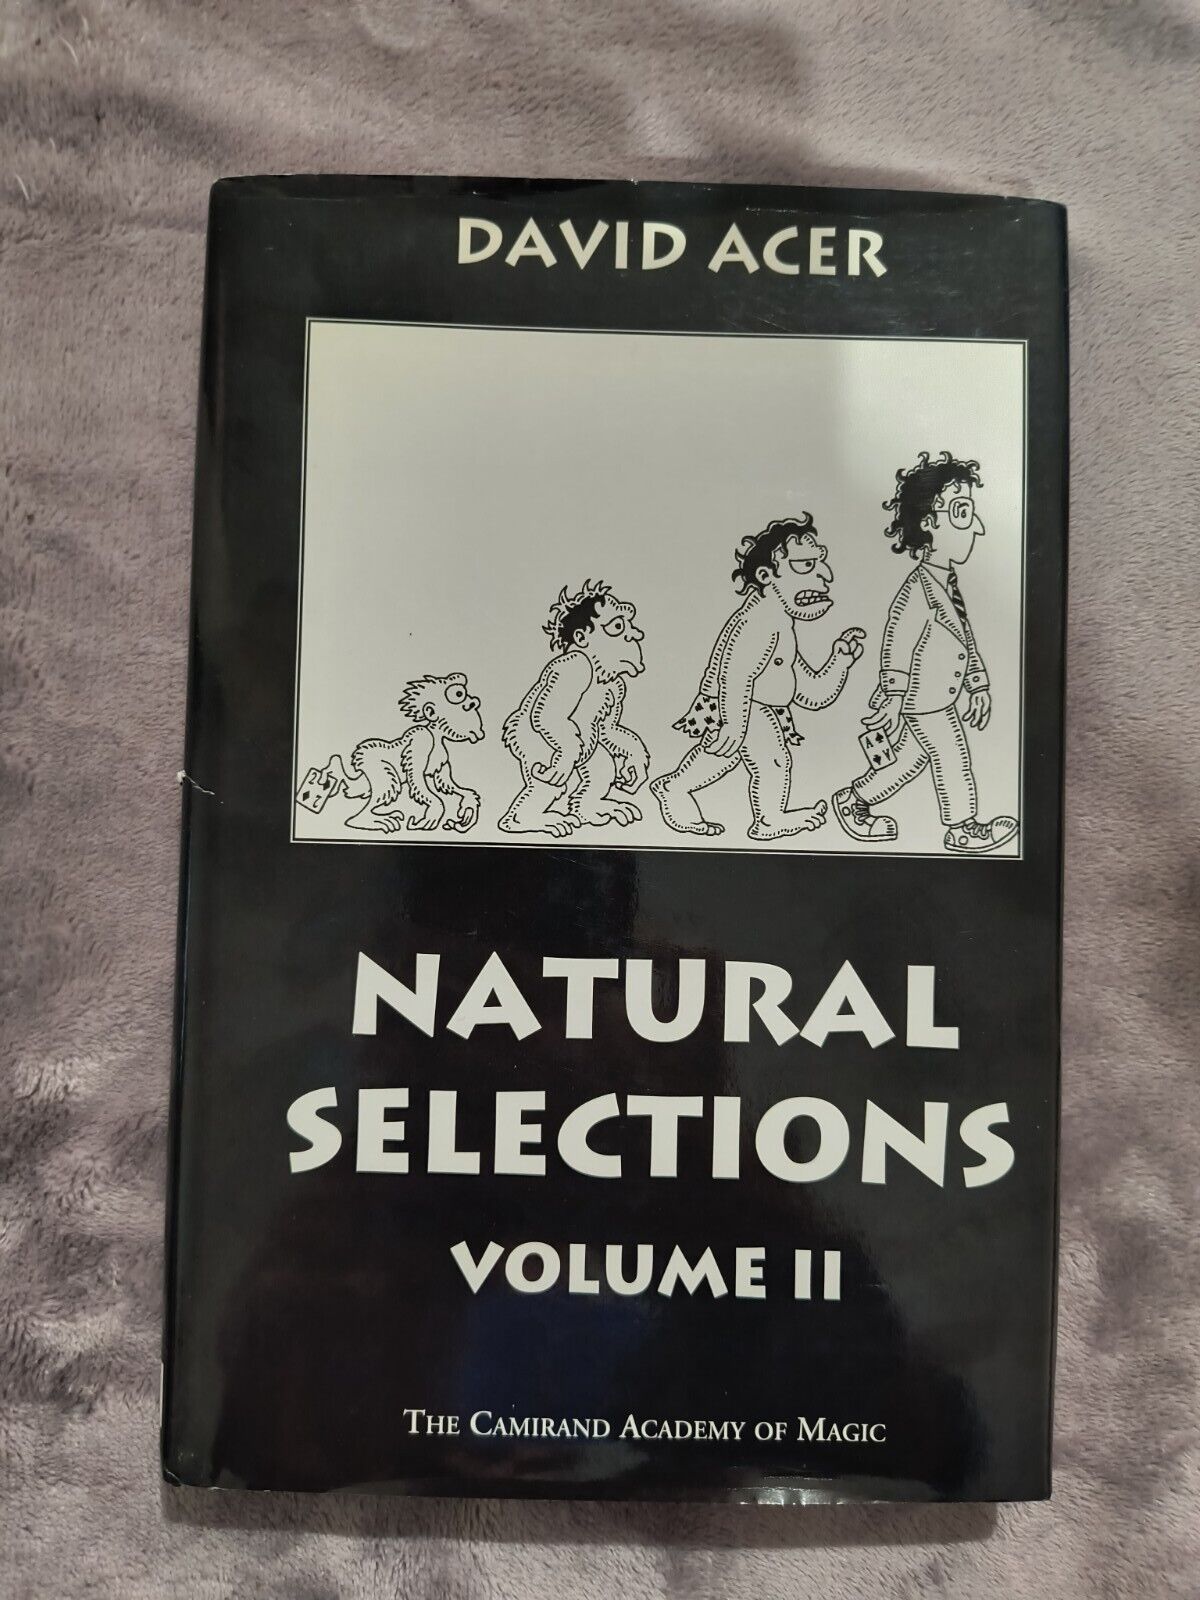 Natural selections II 2 By David Acer - Hardcover Magic Book - Cards Close-up 